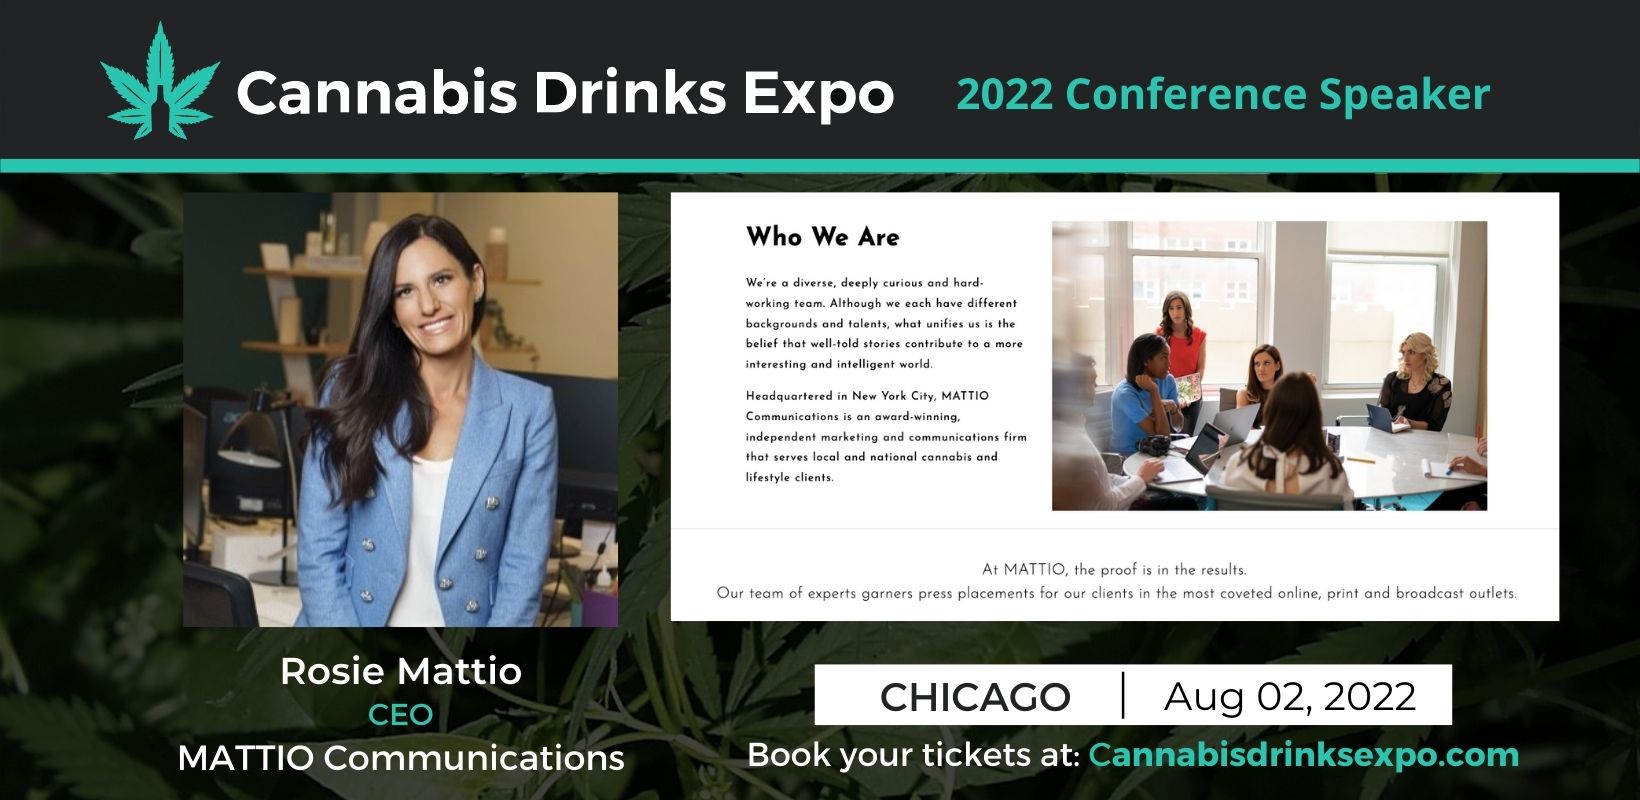 Photo for: Rosie Mattio, CEO of Mattio Communications is scheduled to speak at the 2022 Cannabis Drinks Expo.